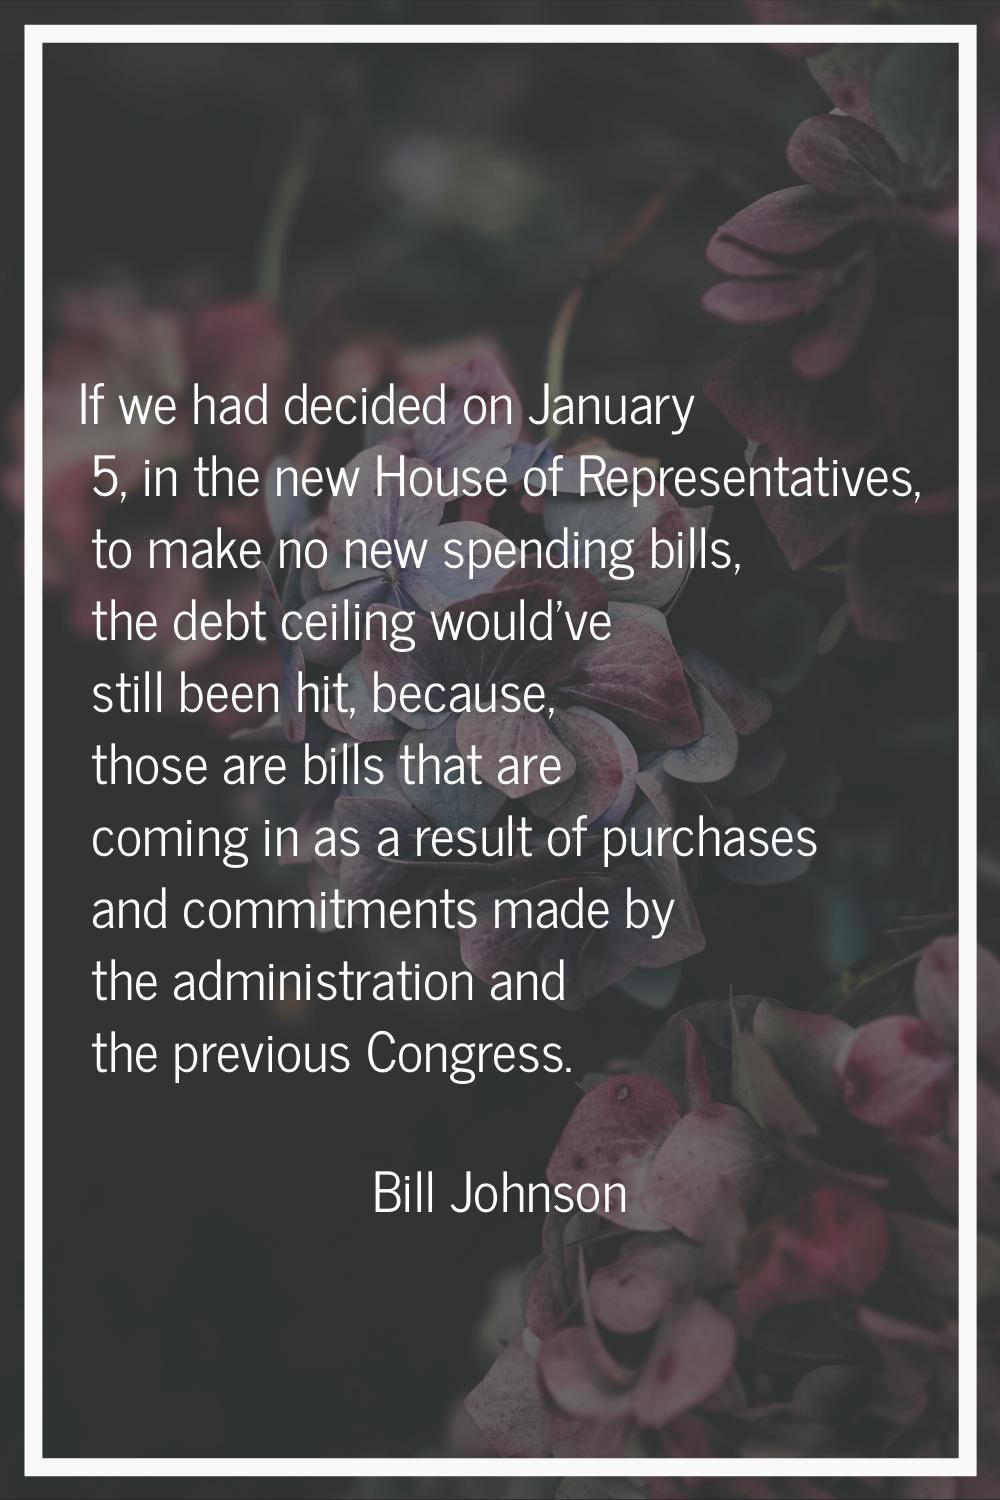 If we had decided on January 5, in the new House of Representatives, to make no new spending bills,